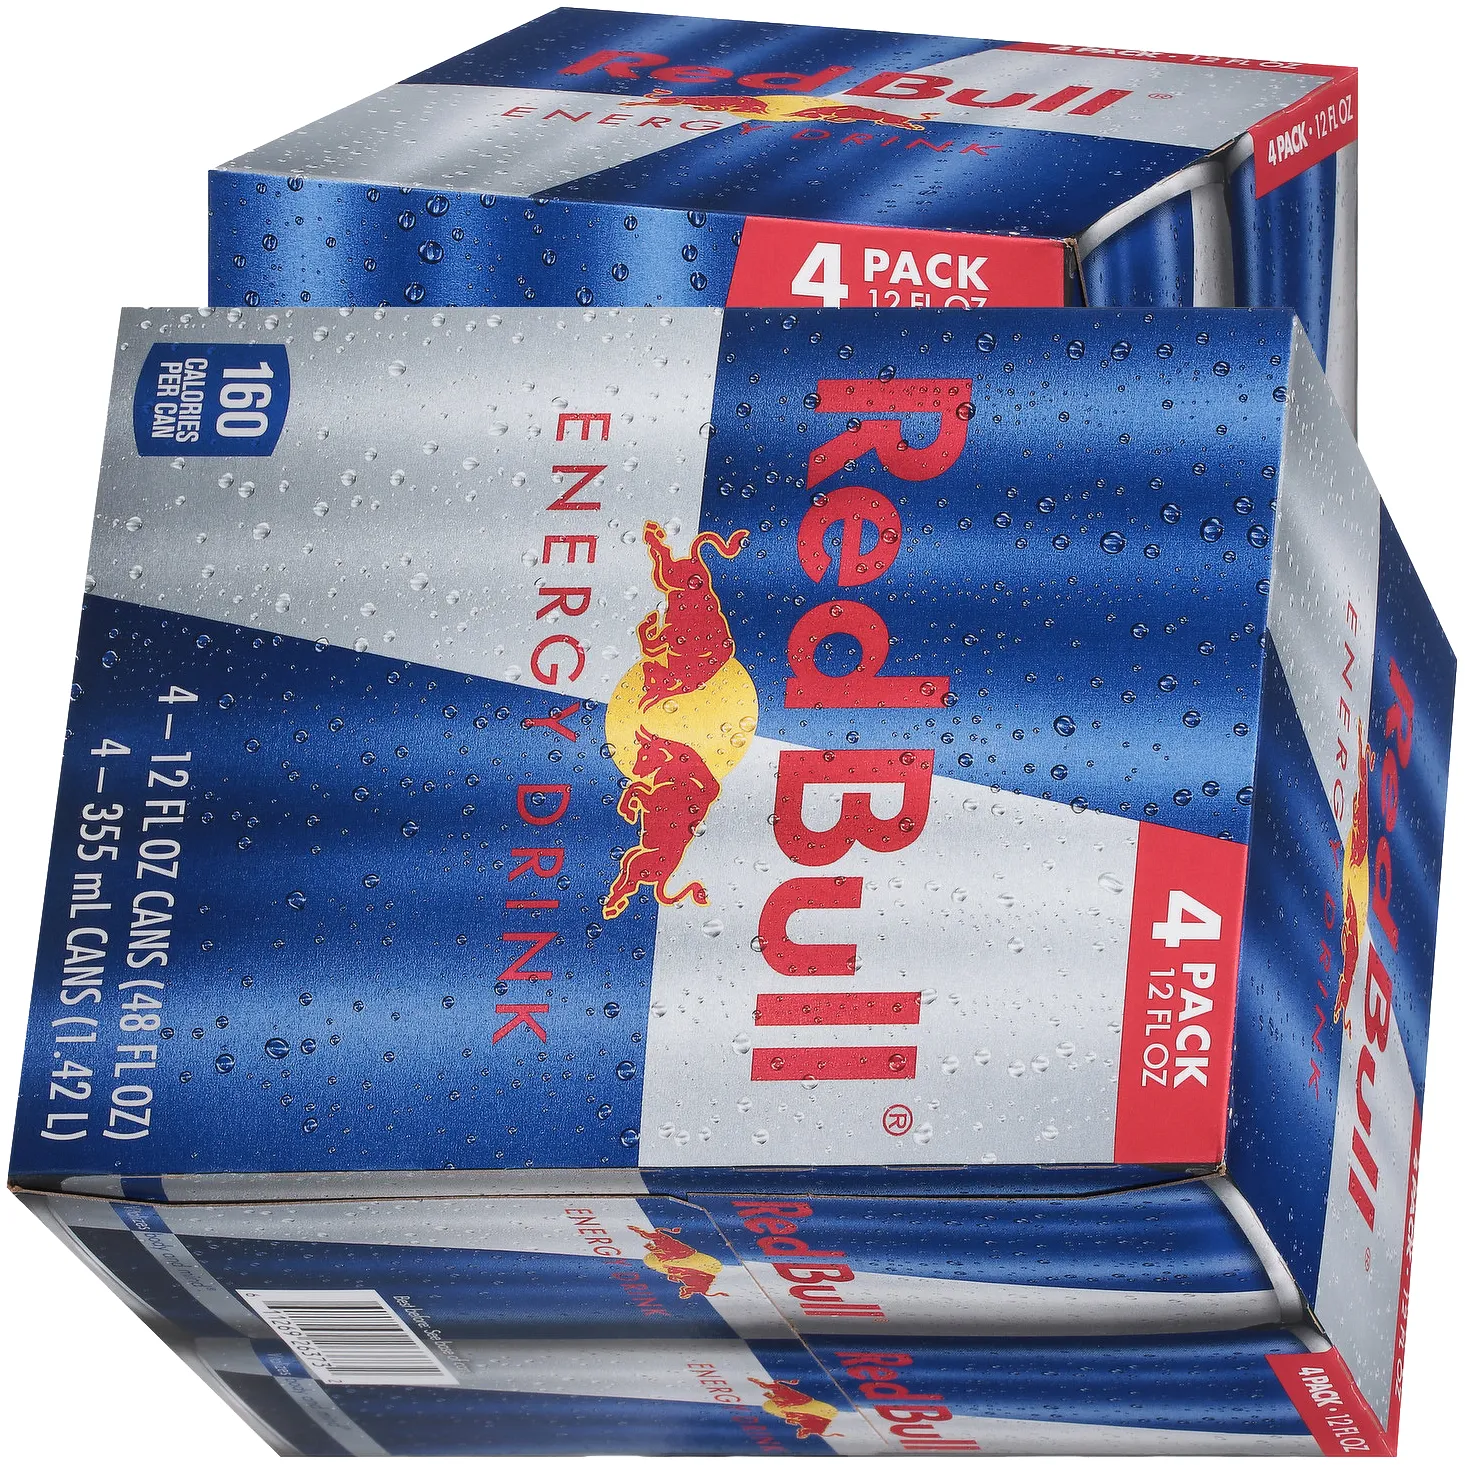 Free Red Bull 4-Pack (4x 250ML Cans)